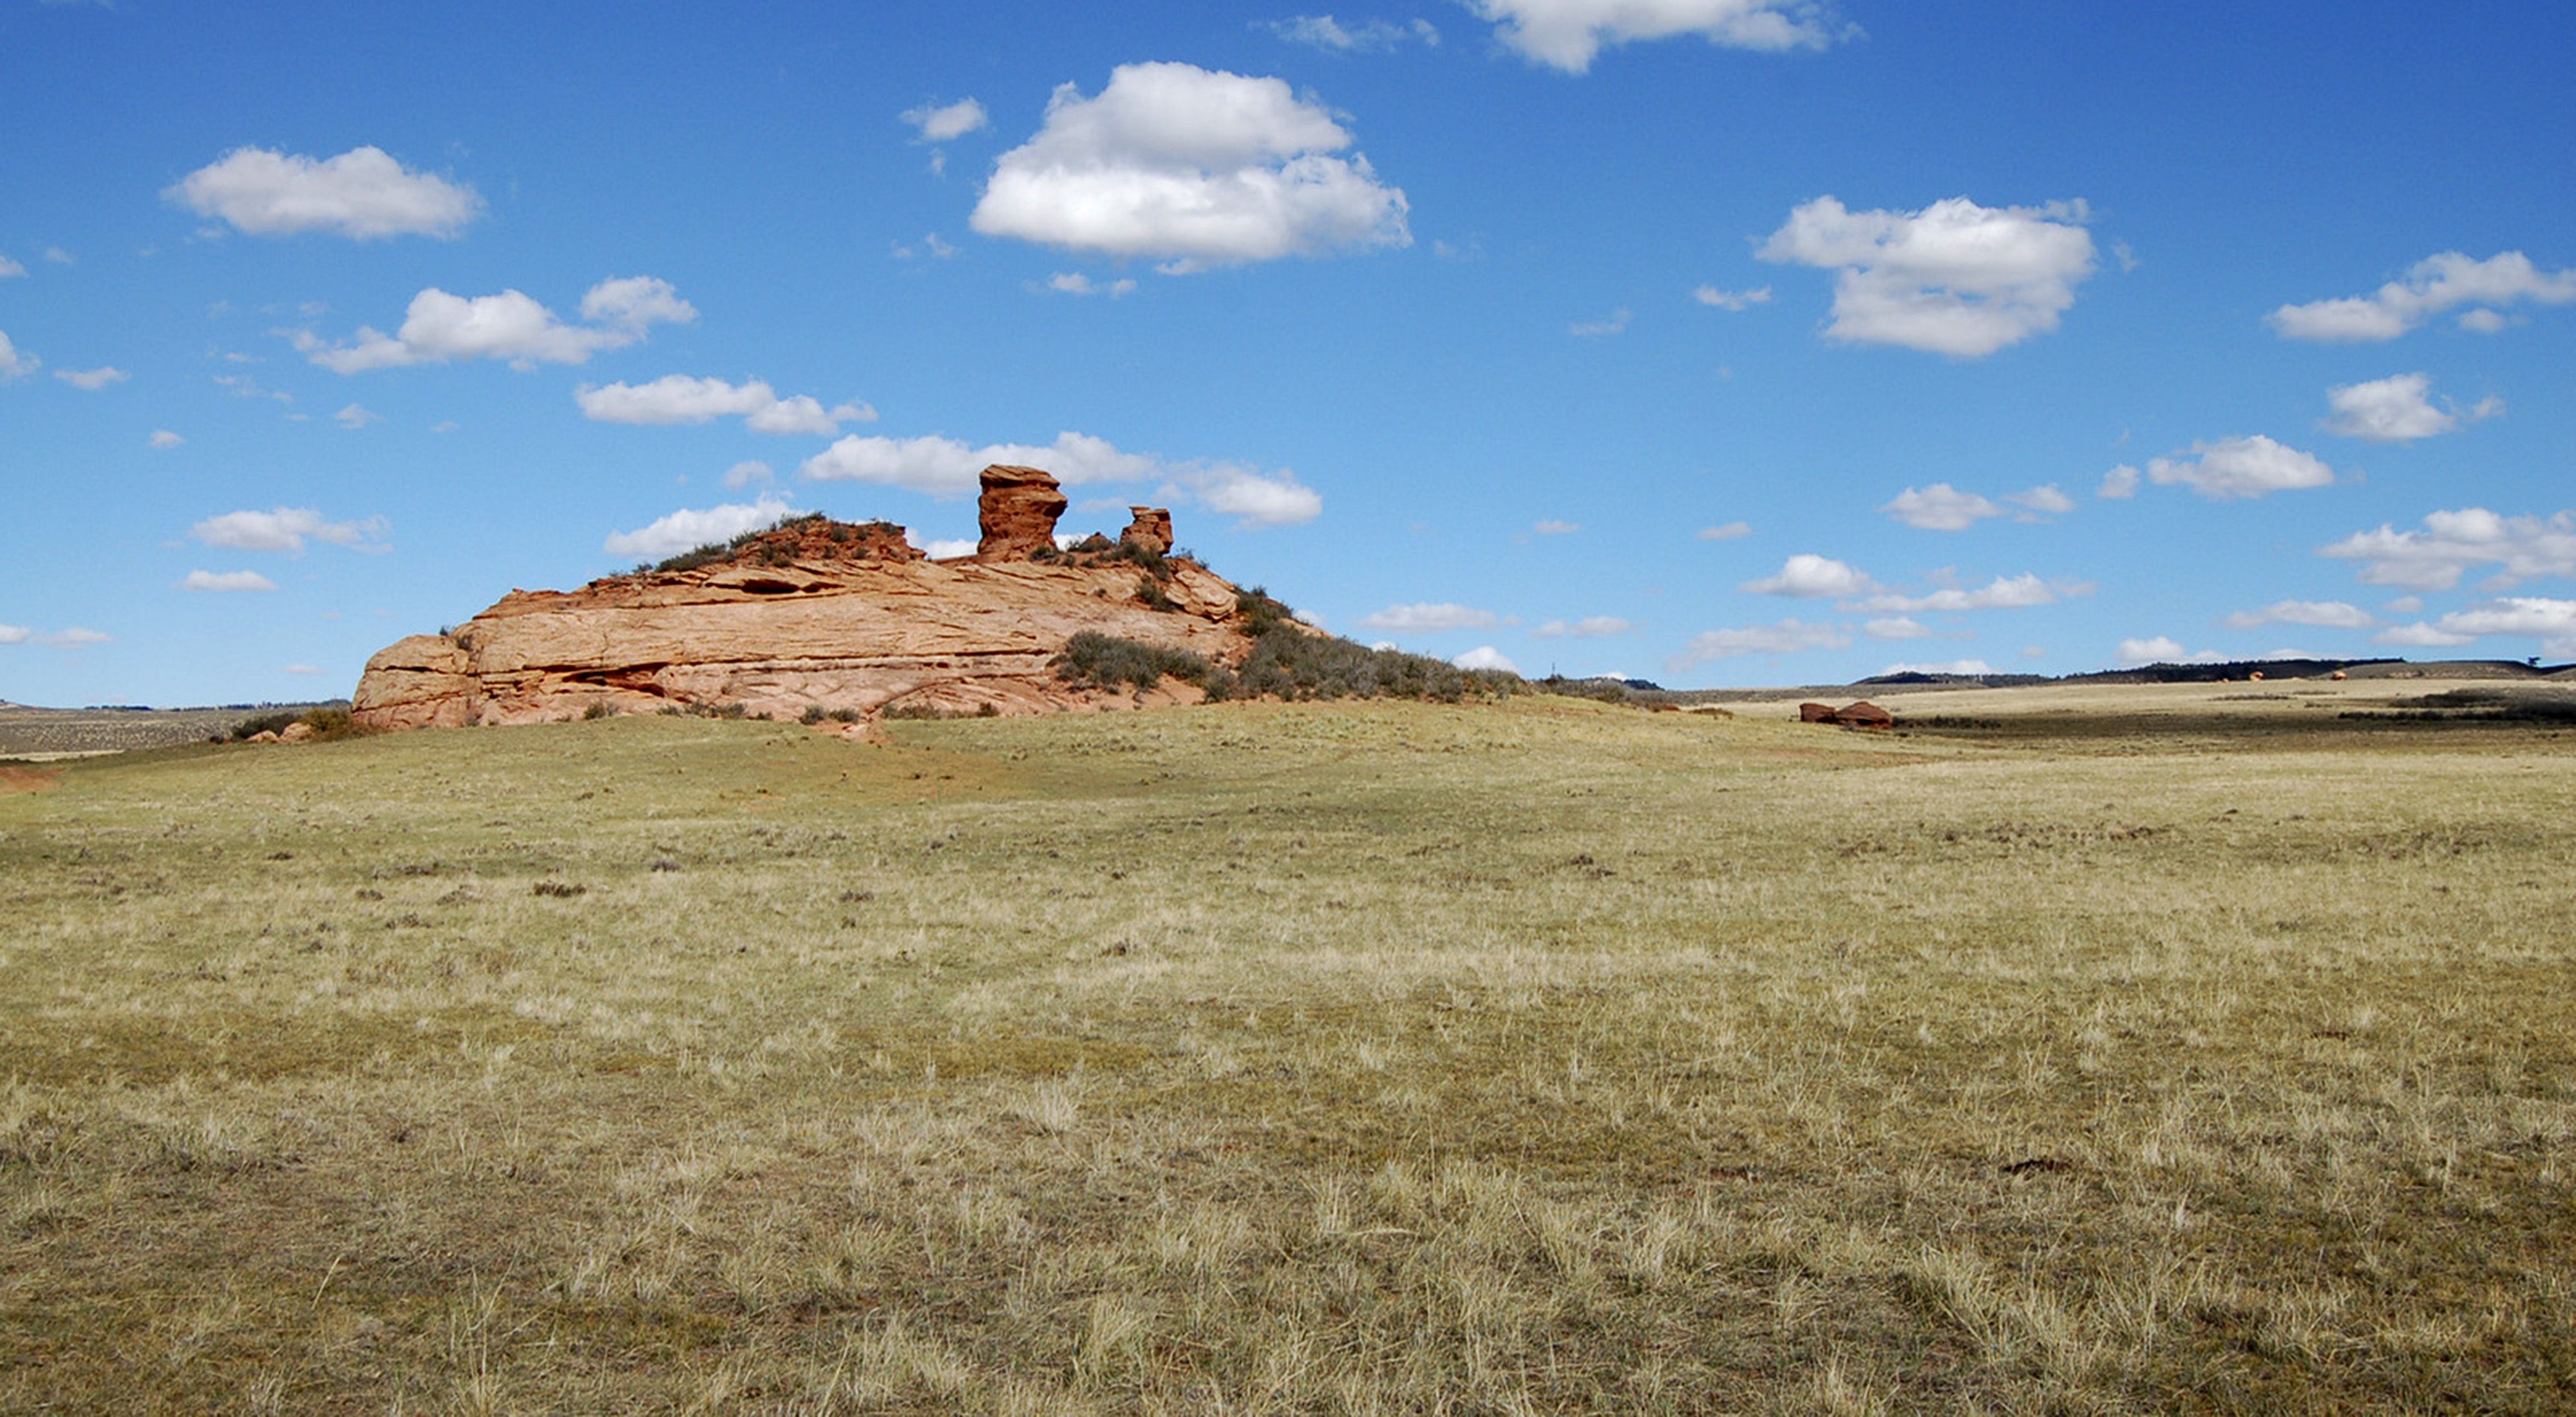 View across a dry grassland toward a red butte under a blue sky with patchy clouds.